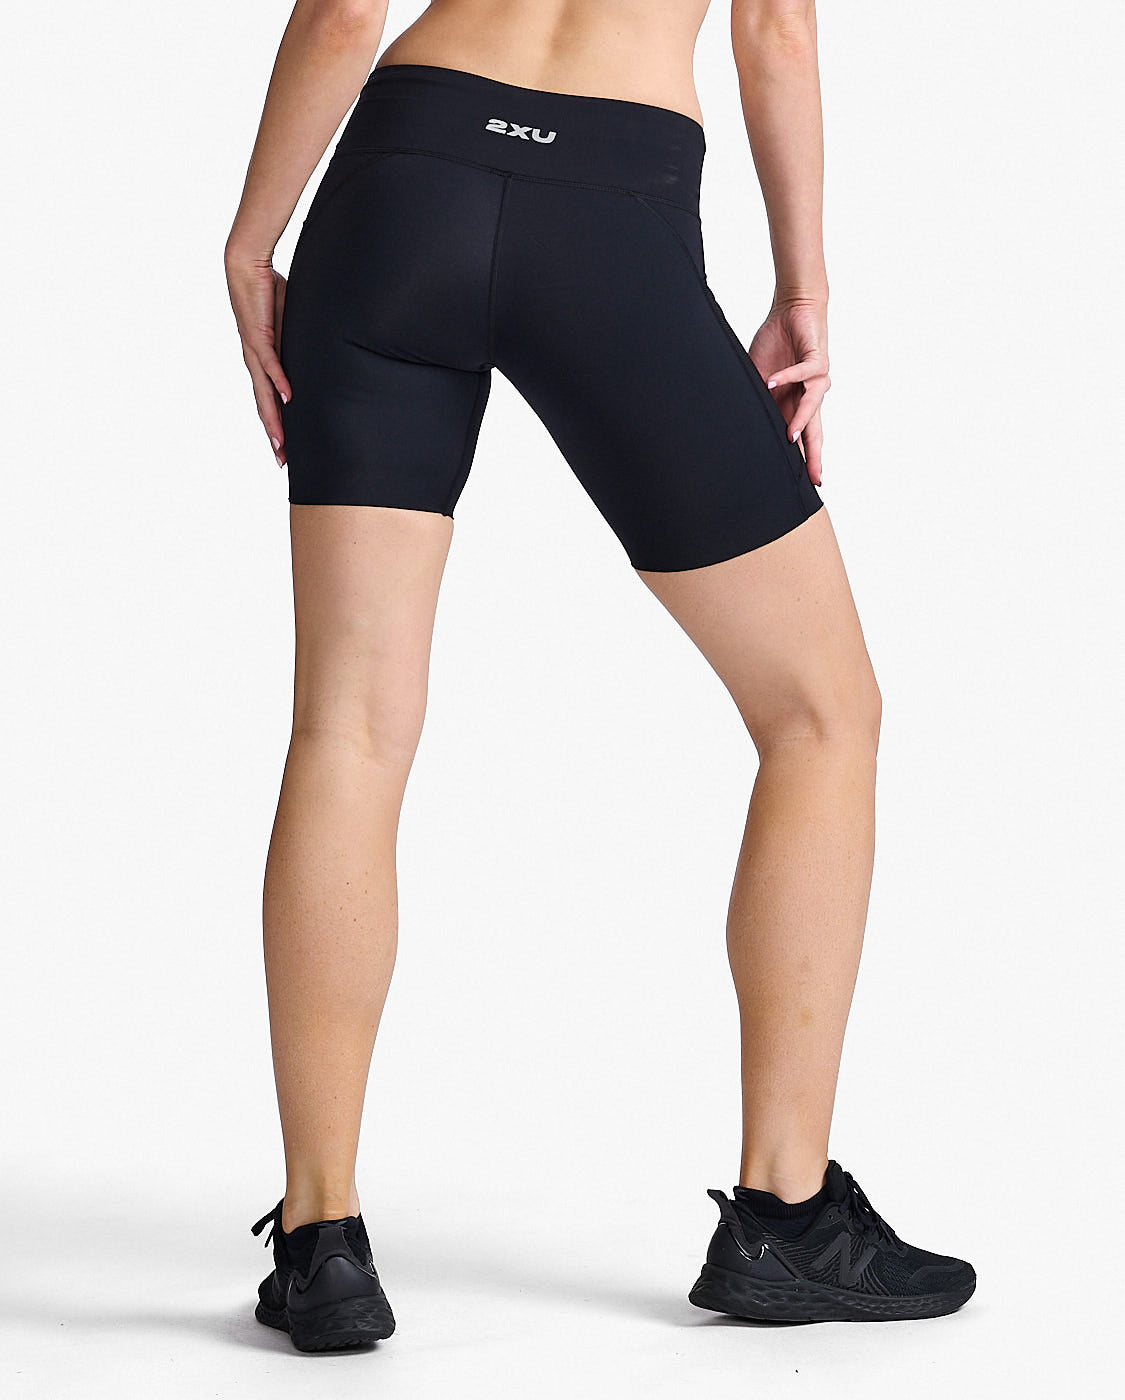 Women's Mid Rise Compression Shorts